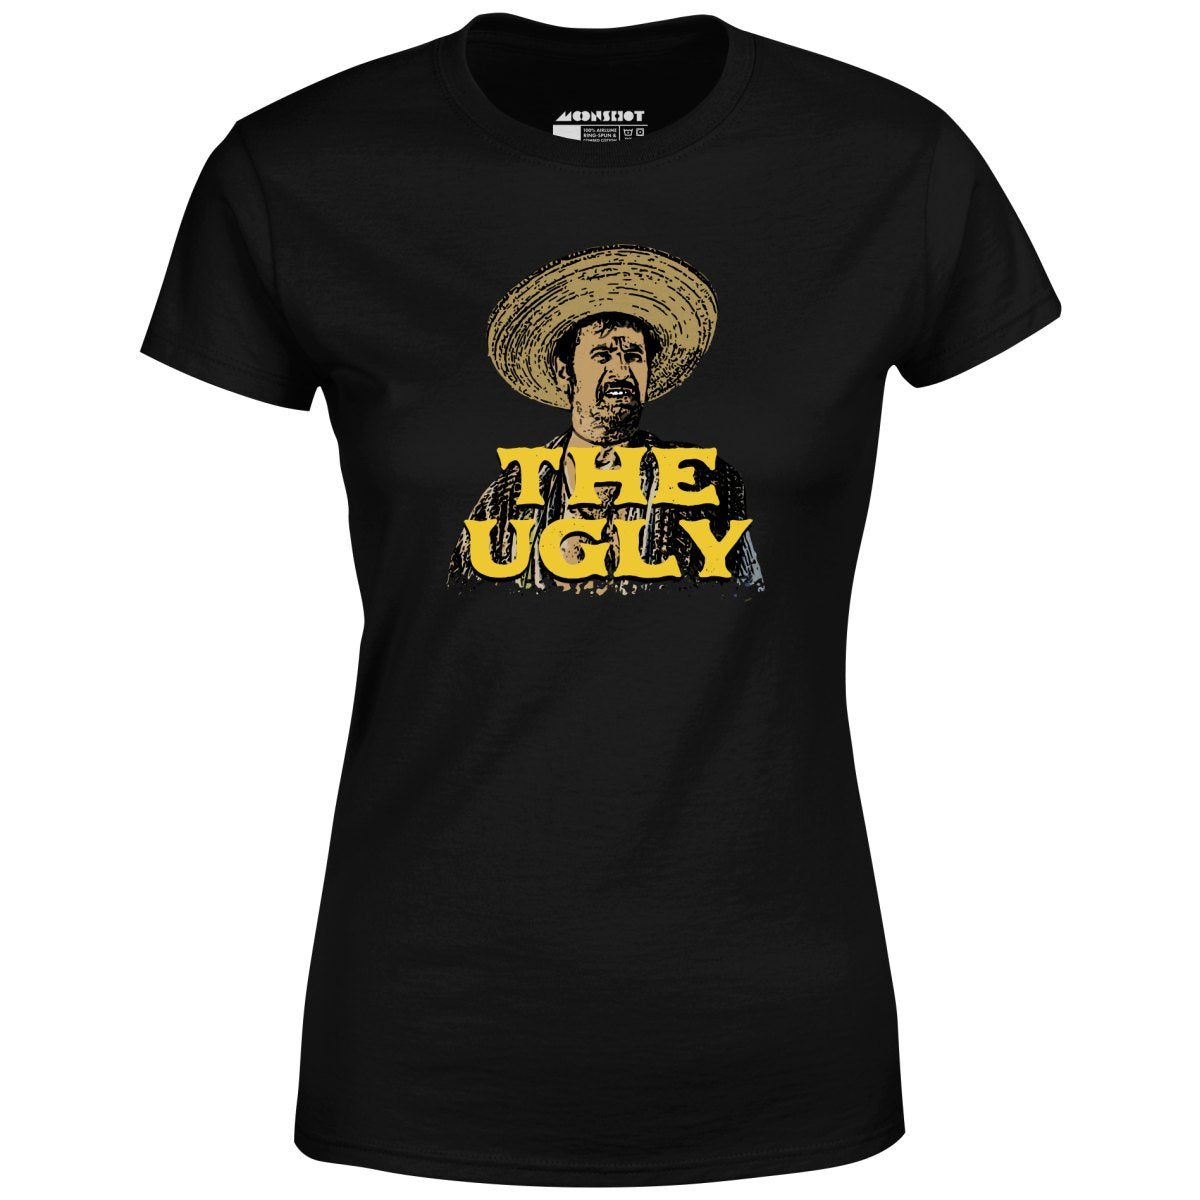 The Ugly - Women's T-Shirt